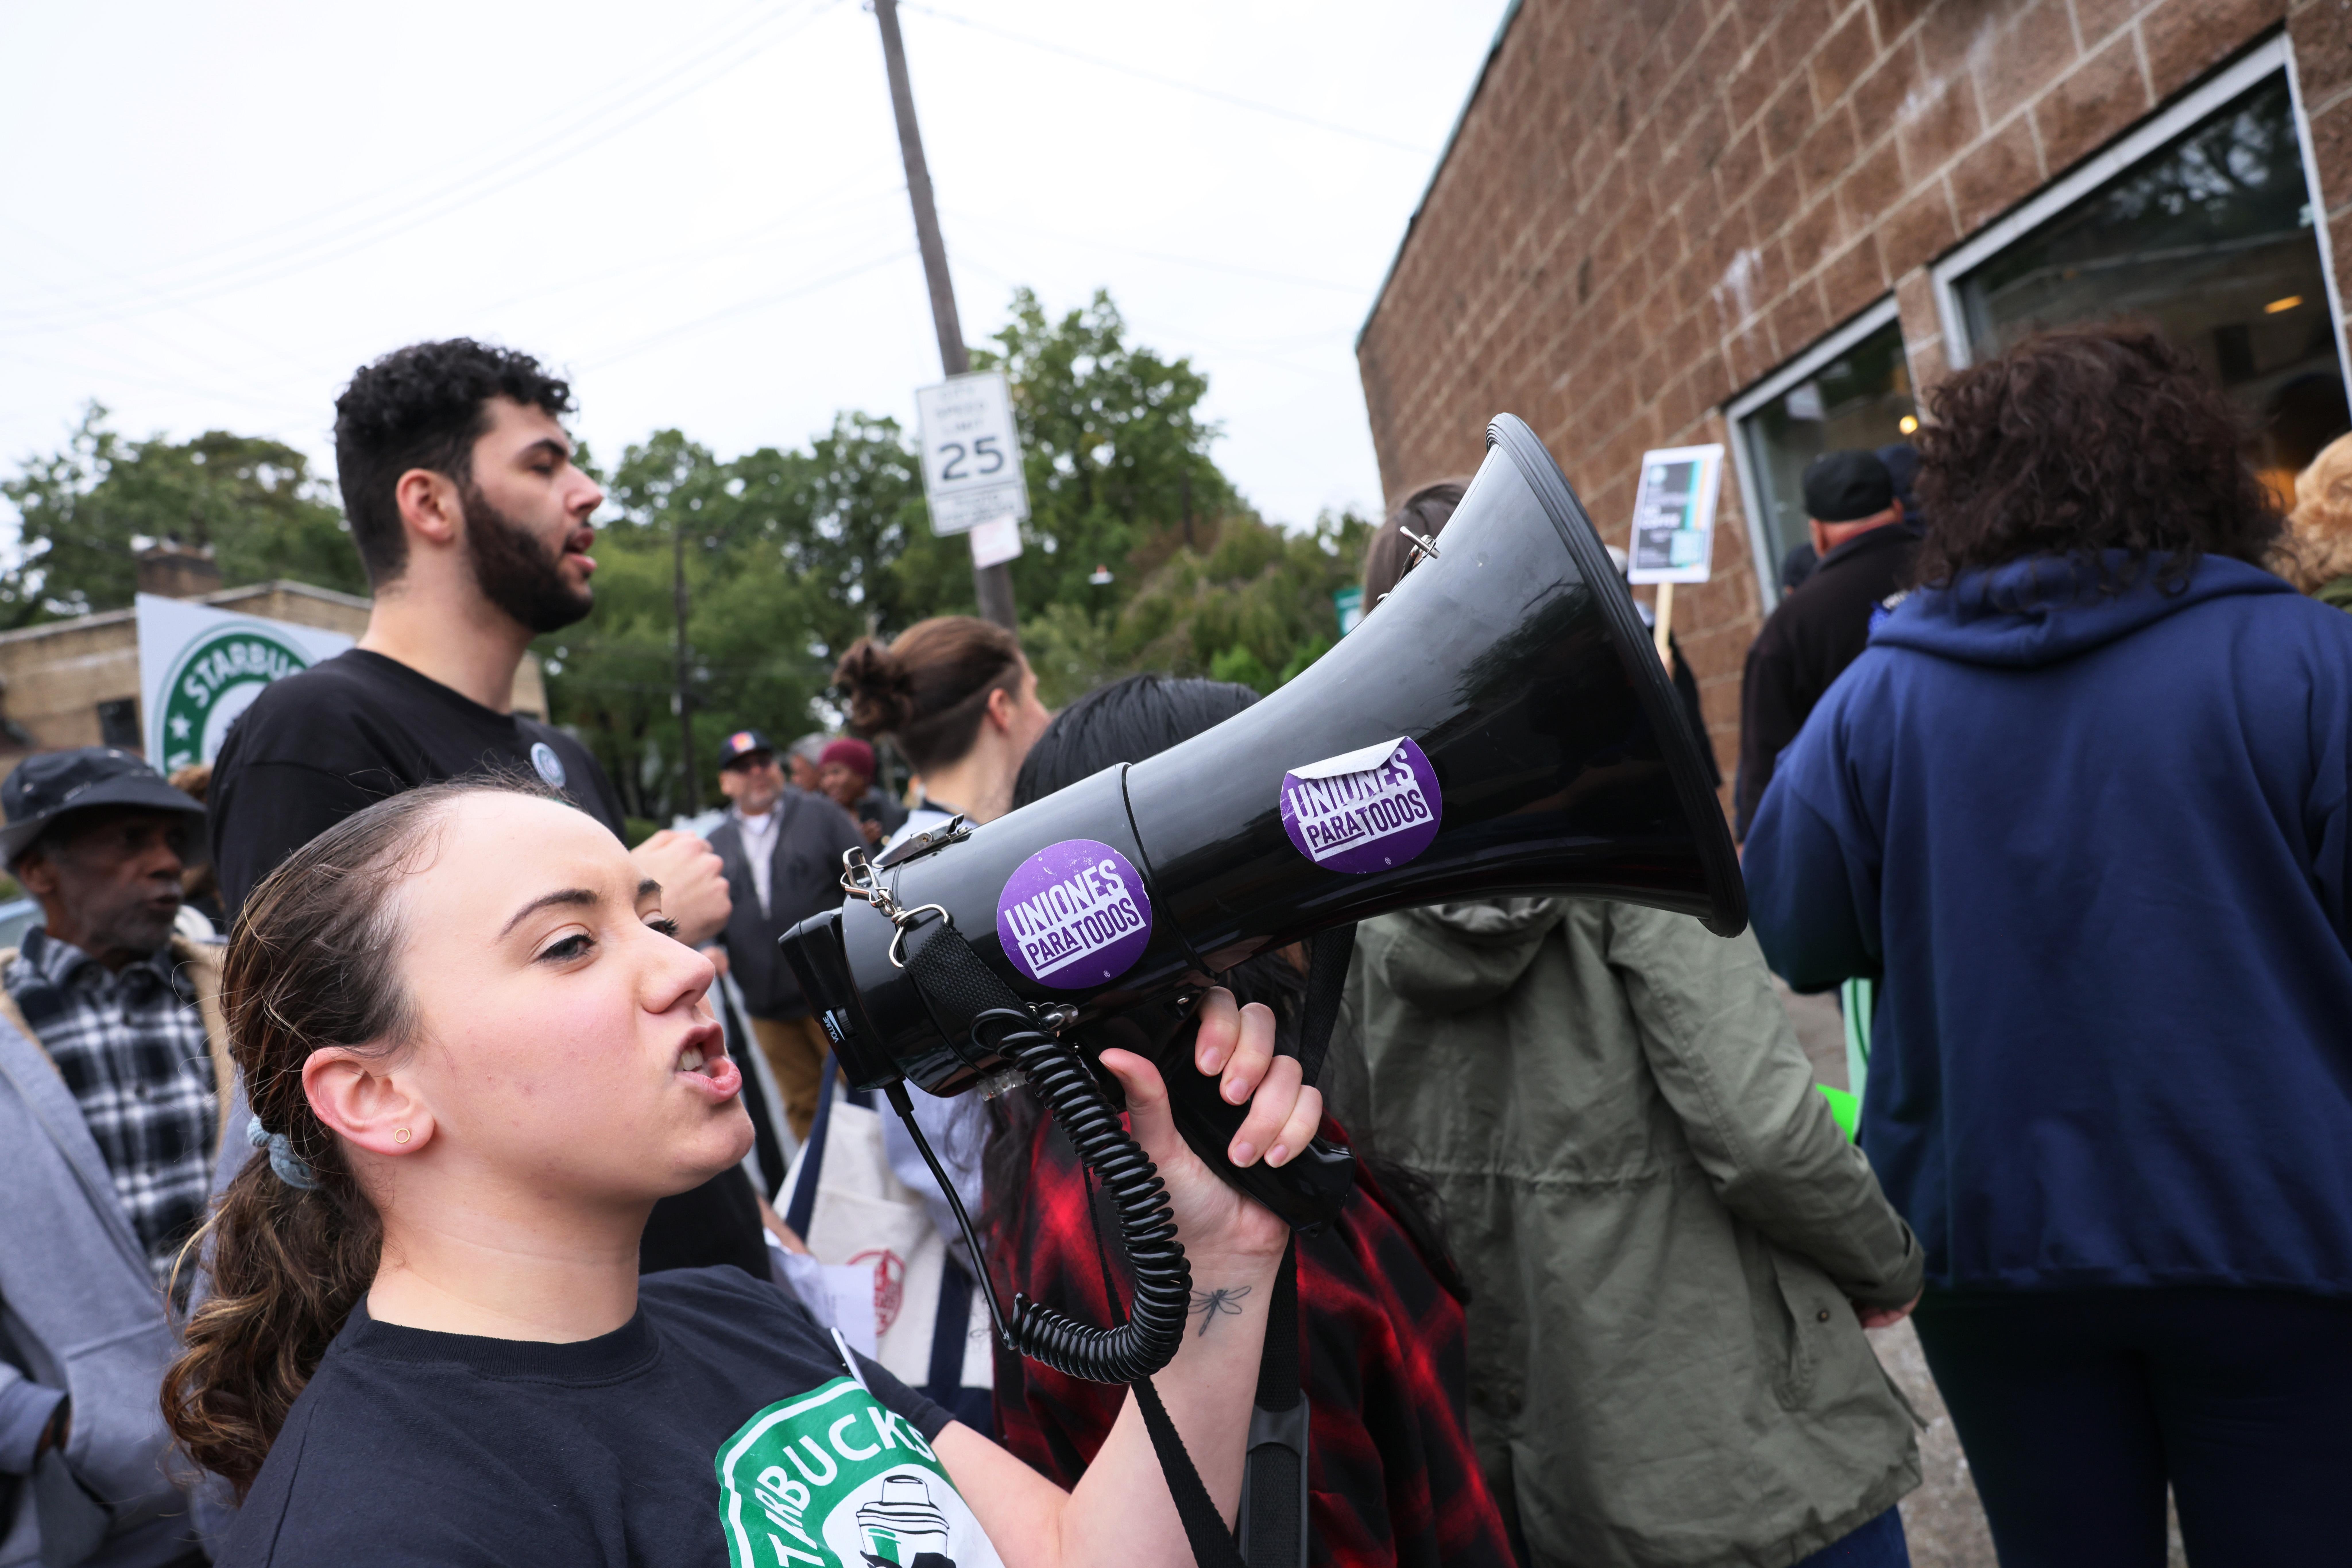 A woman in a Starbucks Union T-shirt speaks into a megaphone with other workers holding signs around her